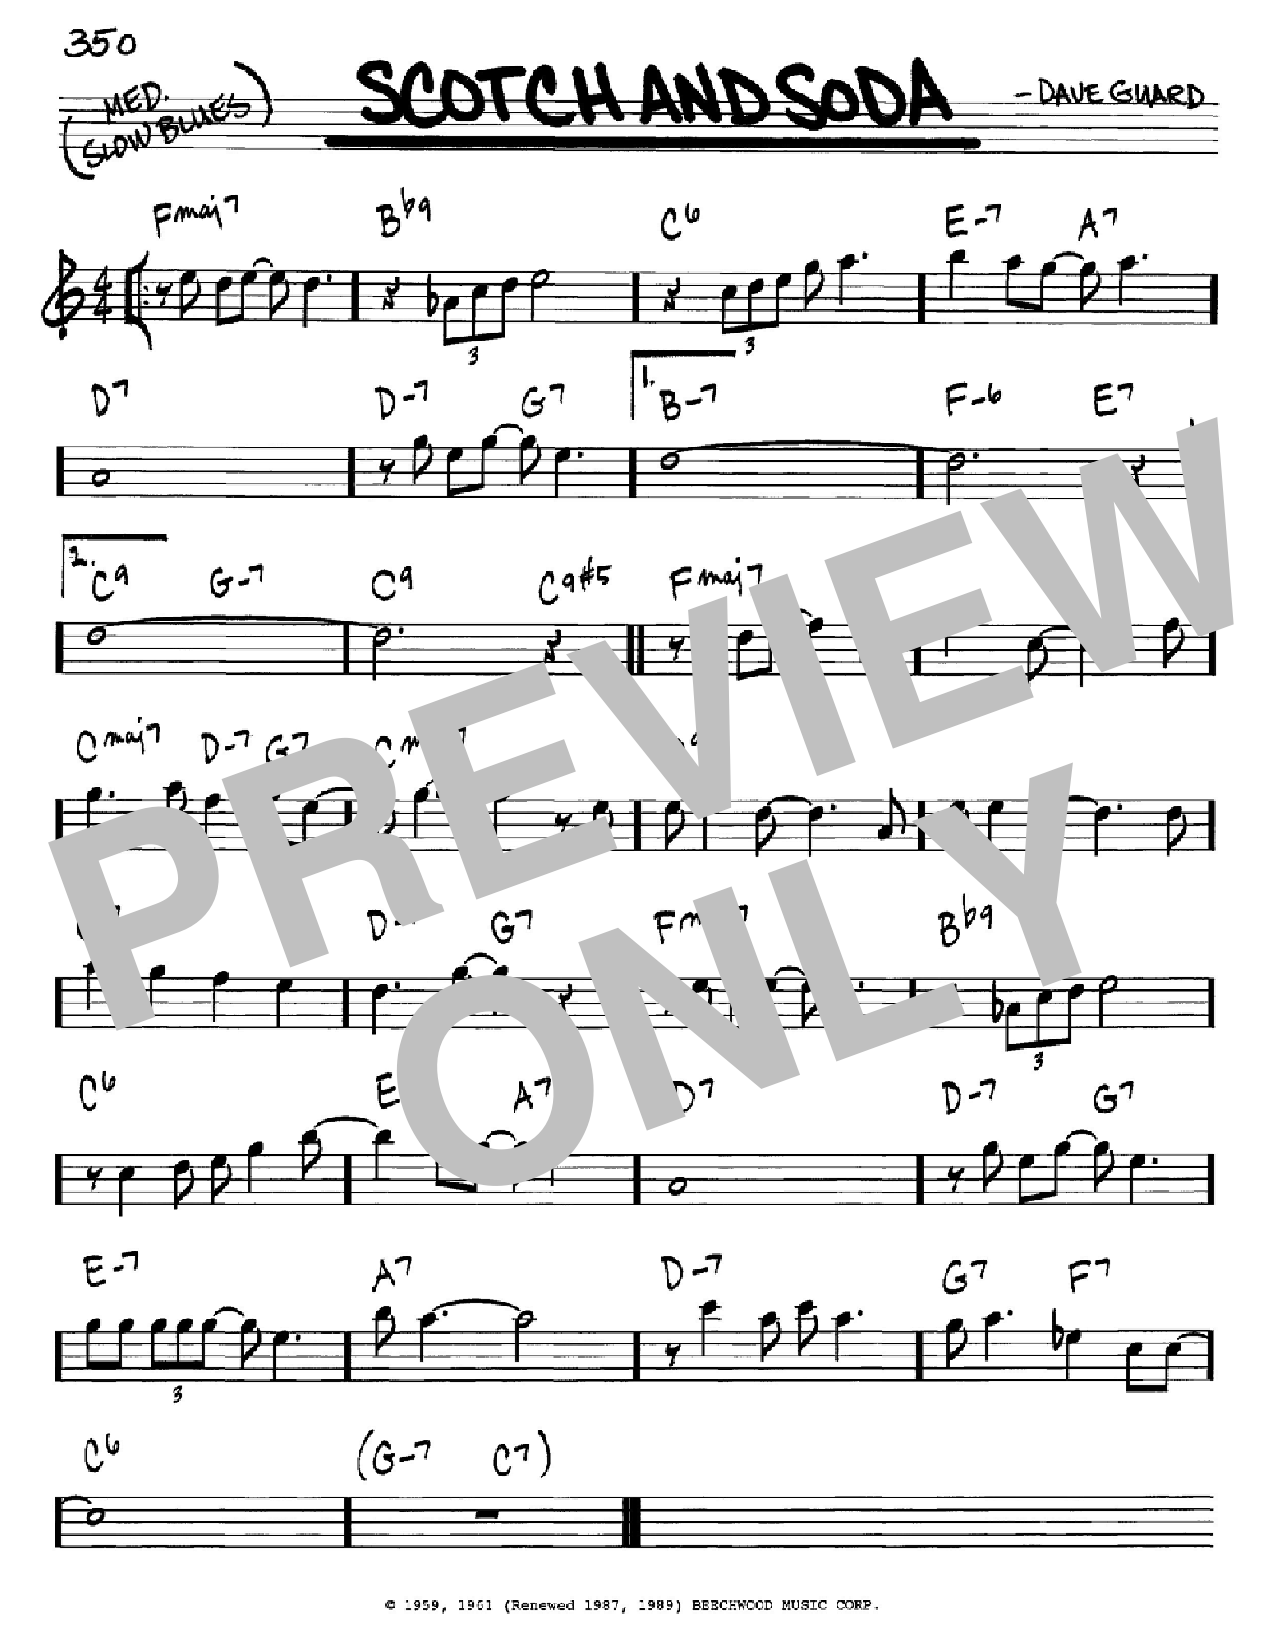 Download The Kingston Trio Scotch And Soda Sheet Music